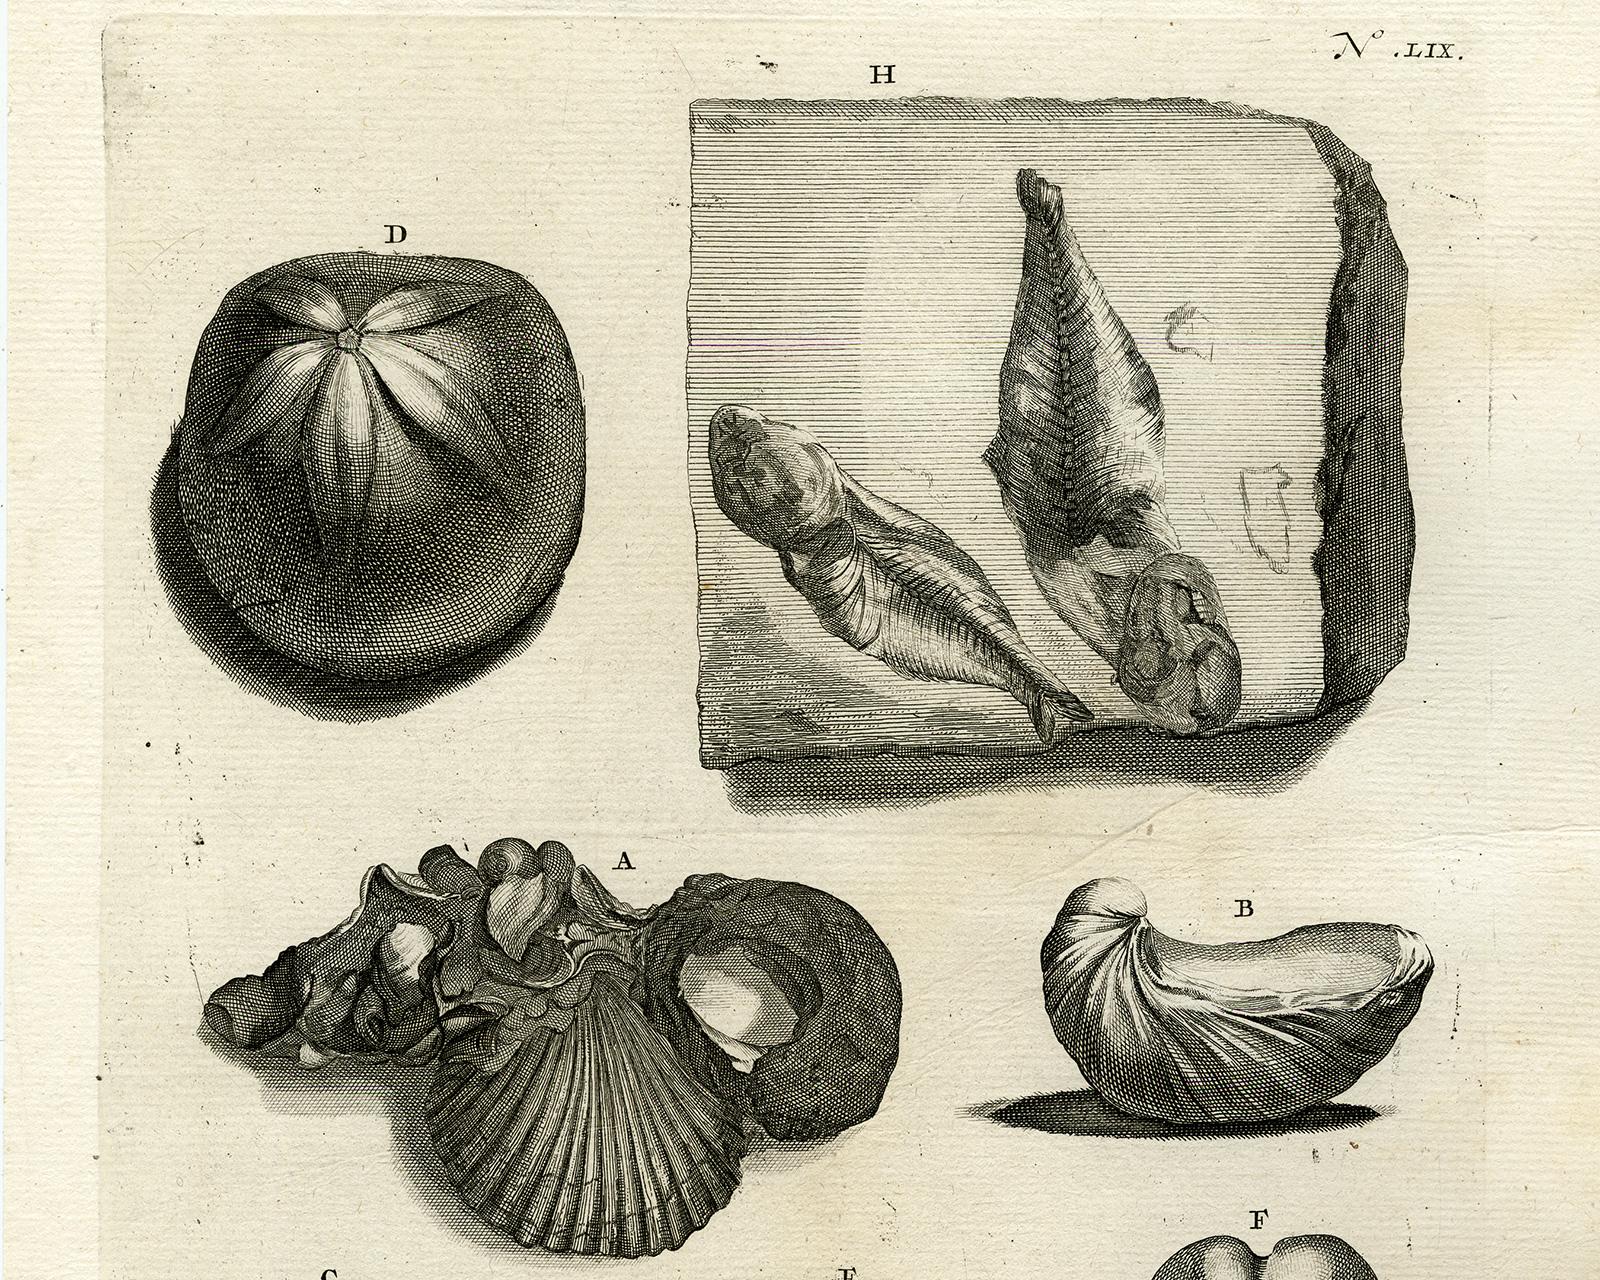 Fossilized shells and fish - Ambonian Cabinet of Curiosities - Rumphius - 18th c - Print by Jorg Eberhardt Rumph